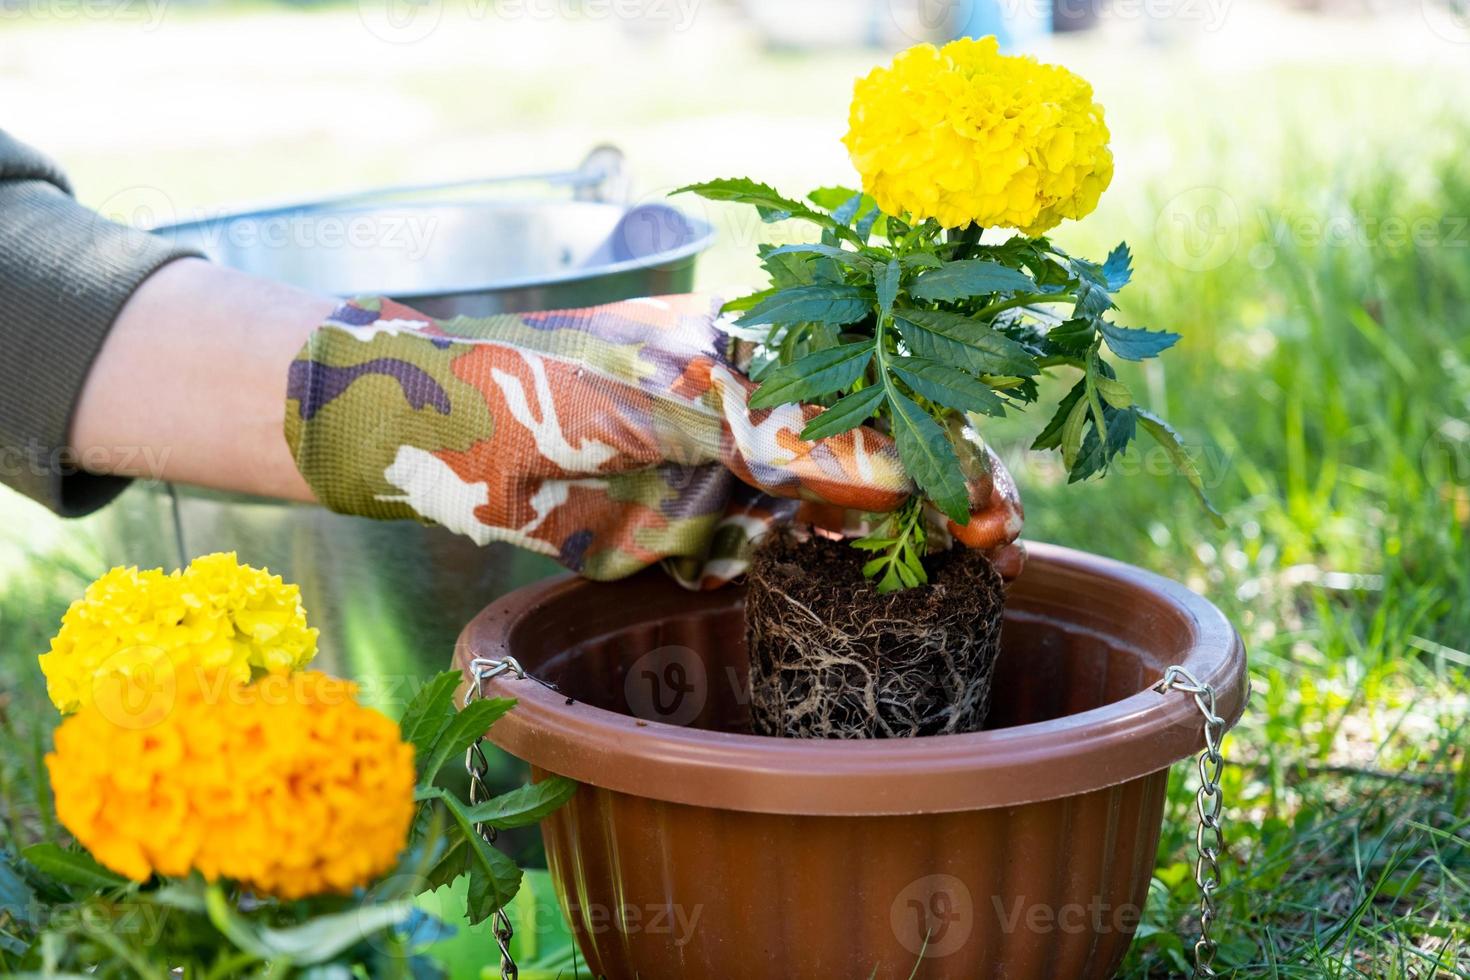 Yellow and orange marigold seedlings with roots are prepared for planting in the open ground in spring. Unpretentious garden flowers in the hands of a gardener, flower bed and yard care photo